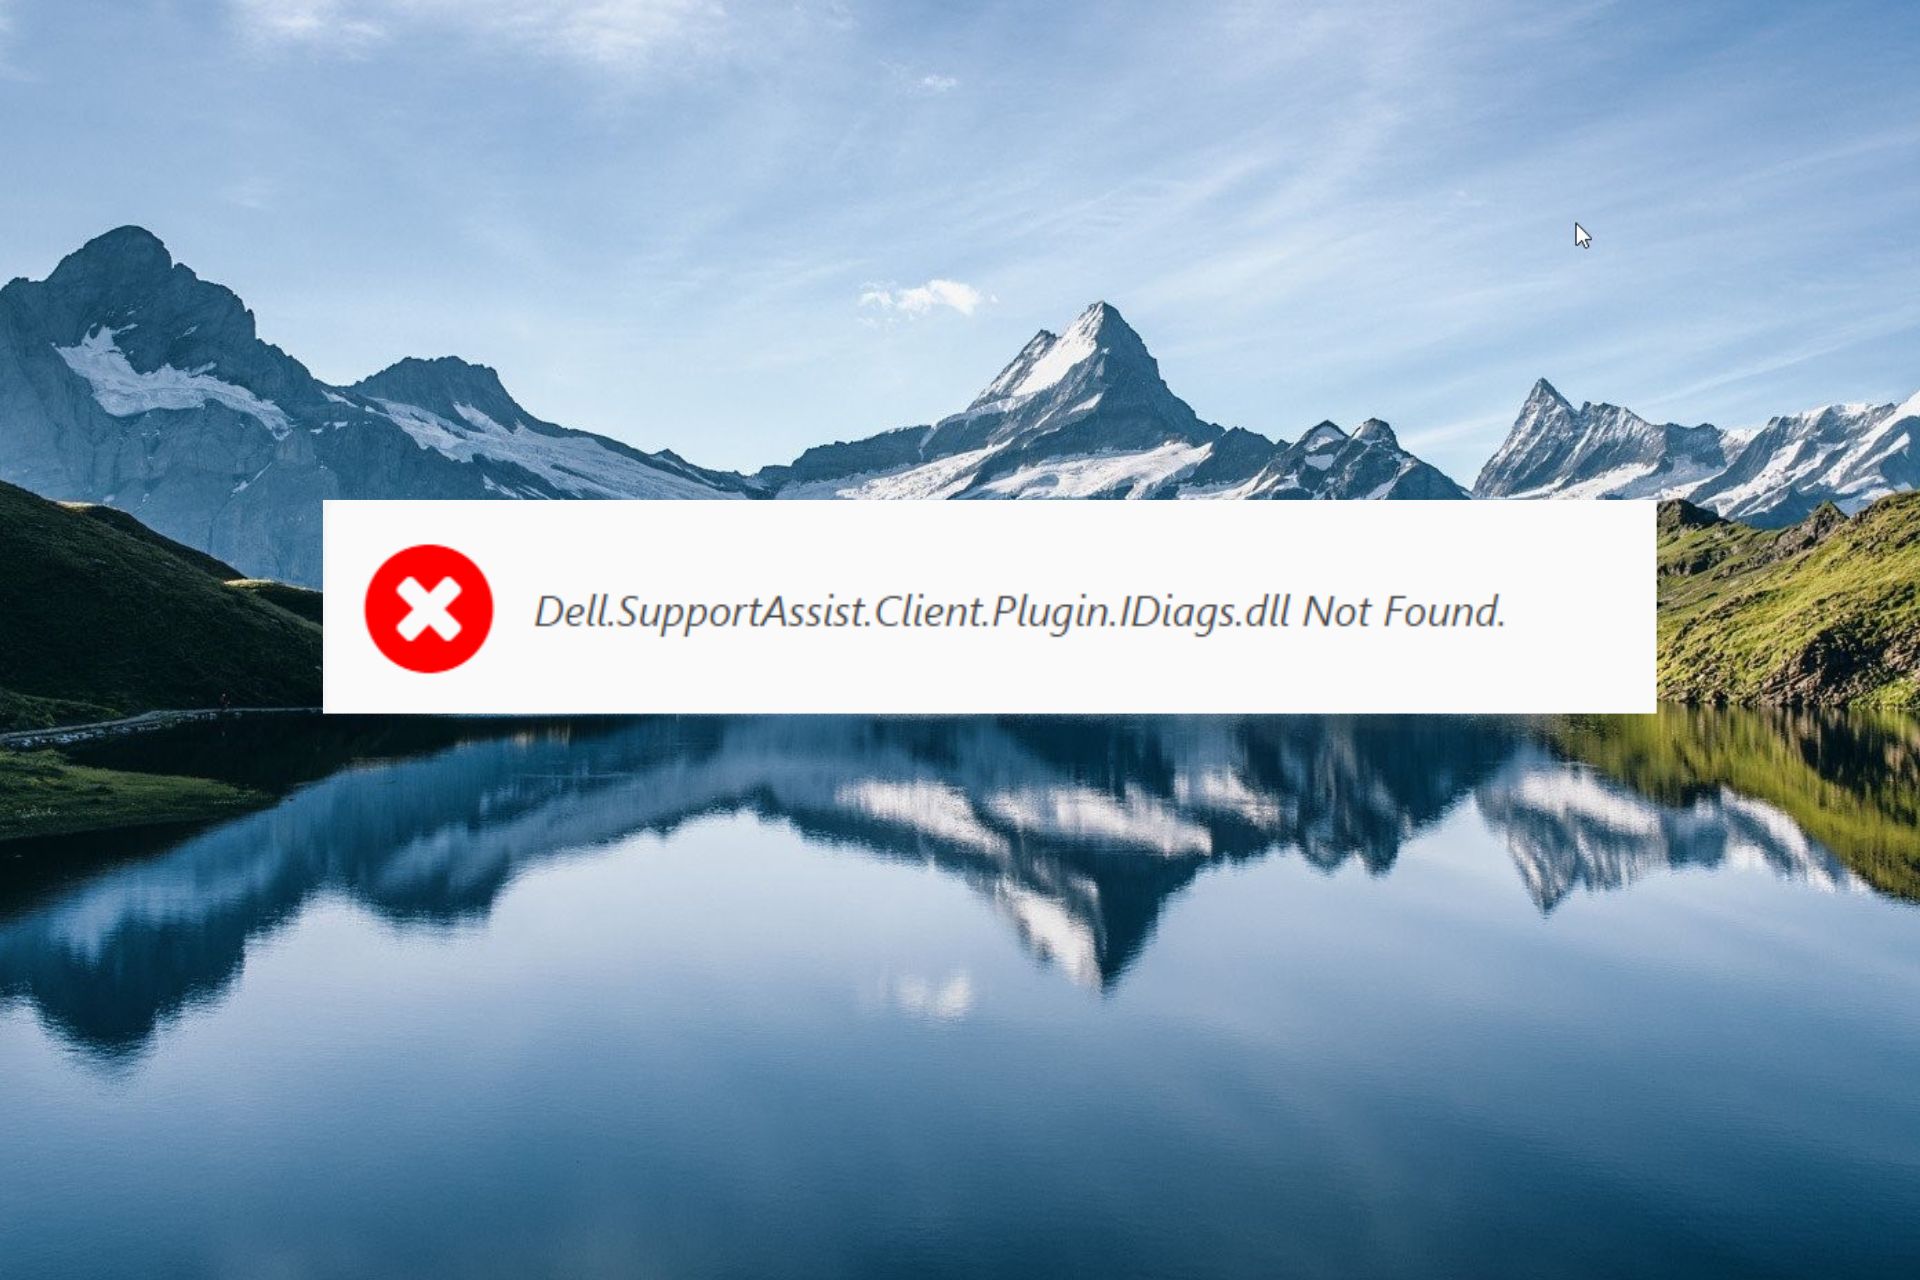 Dell.SupportAssist.Client.Plugin.IDiags.dll